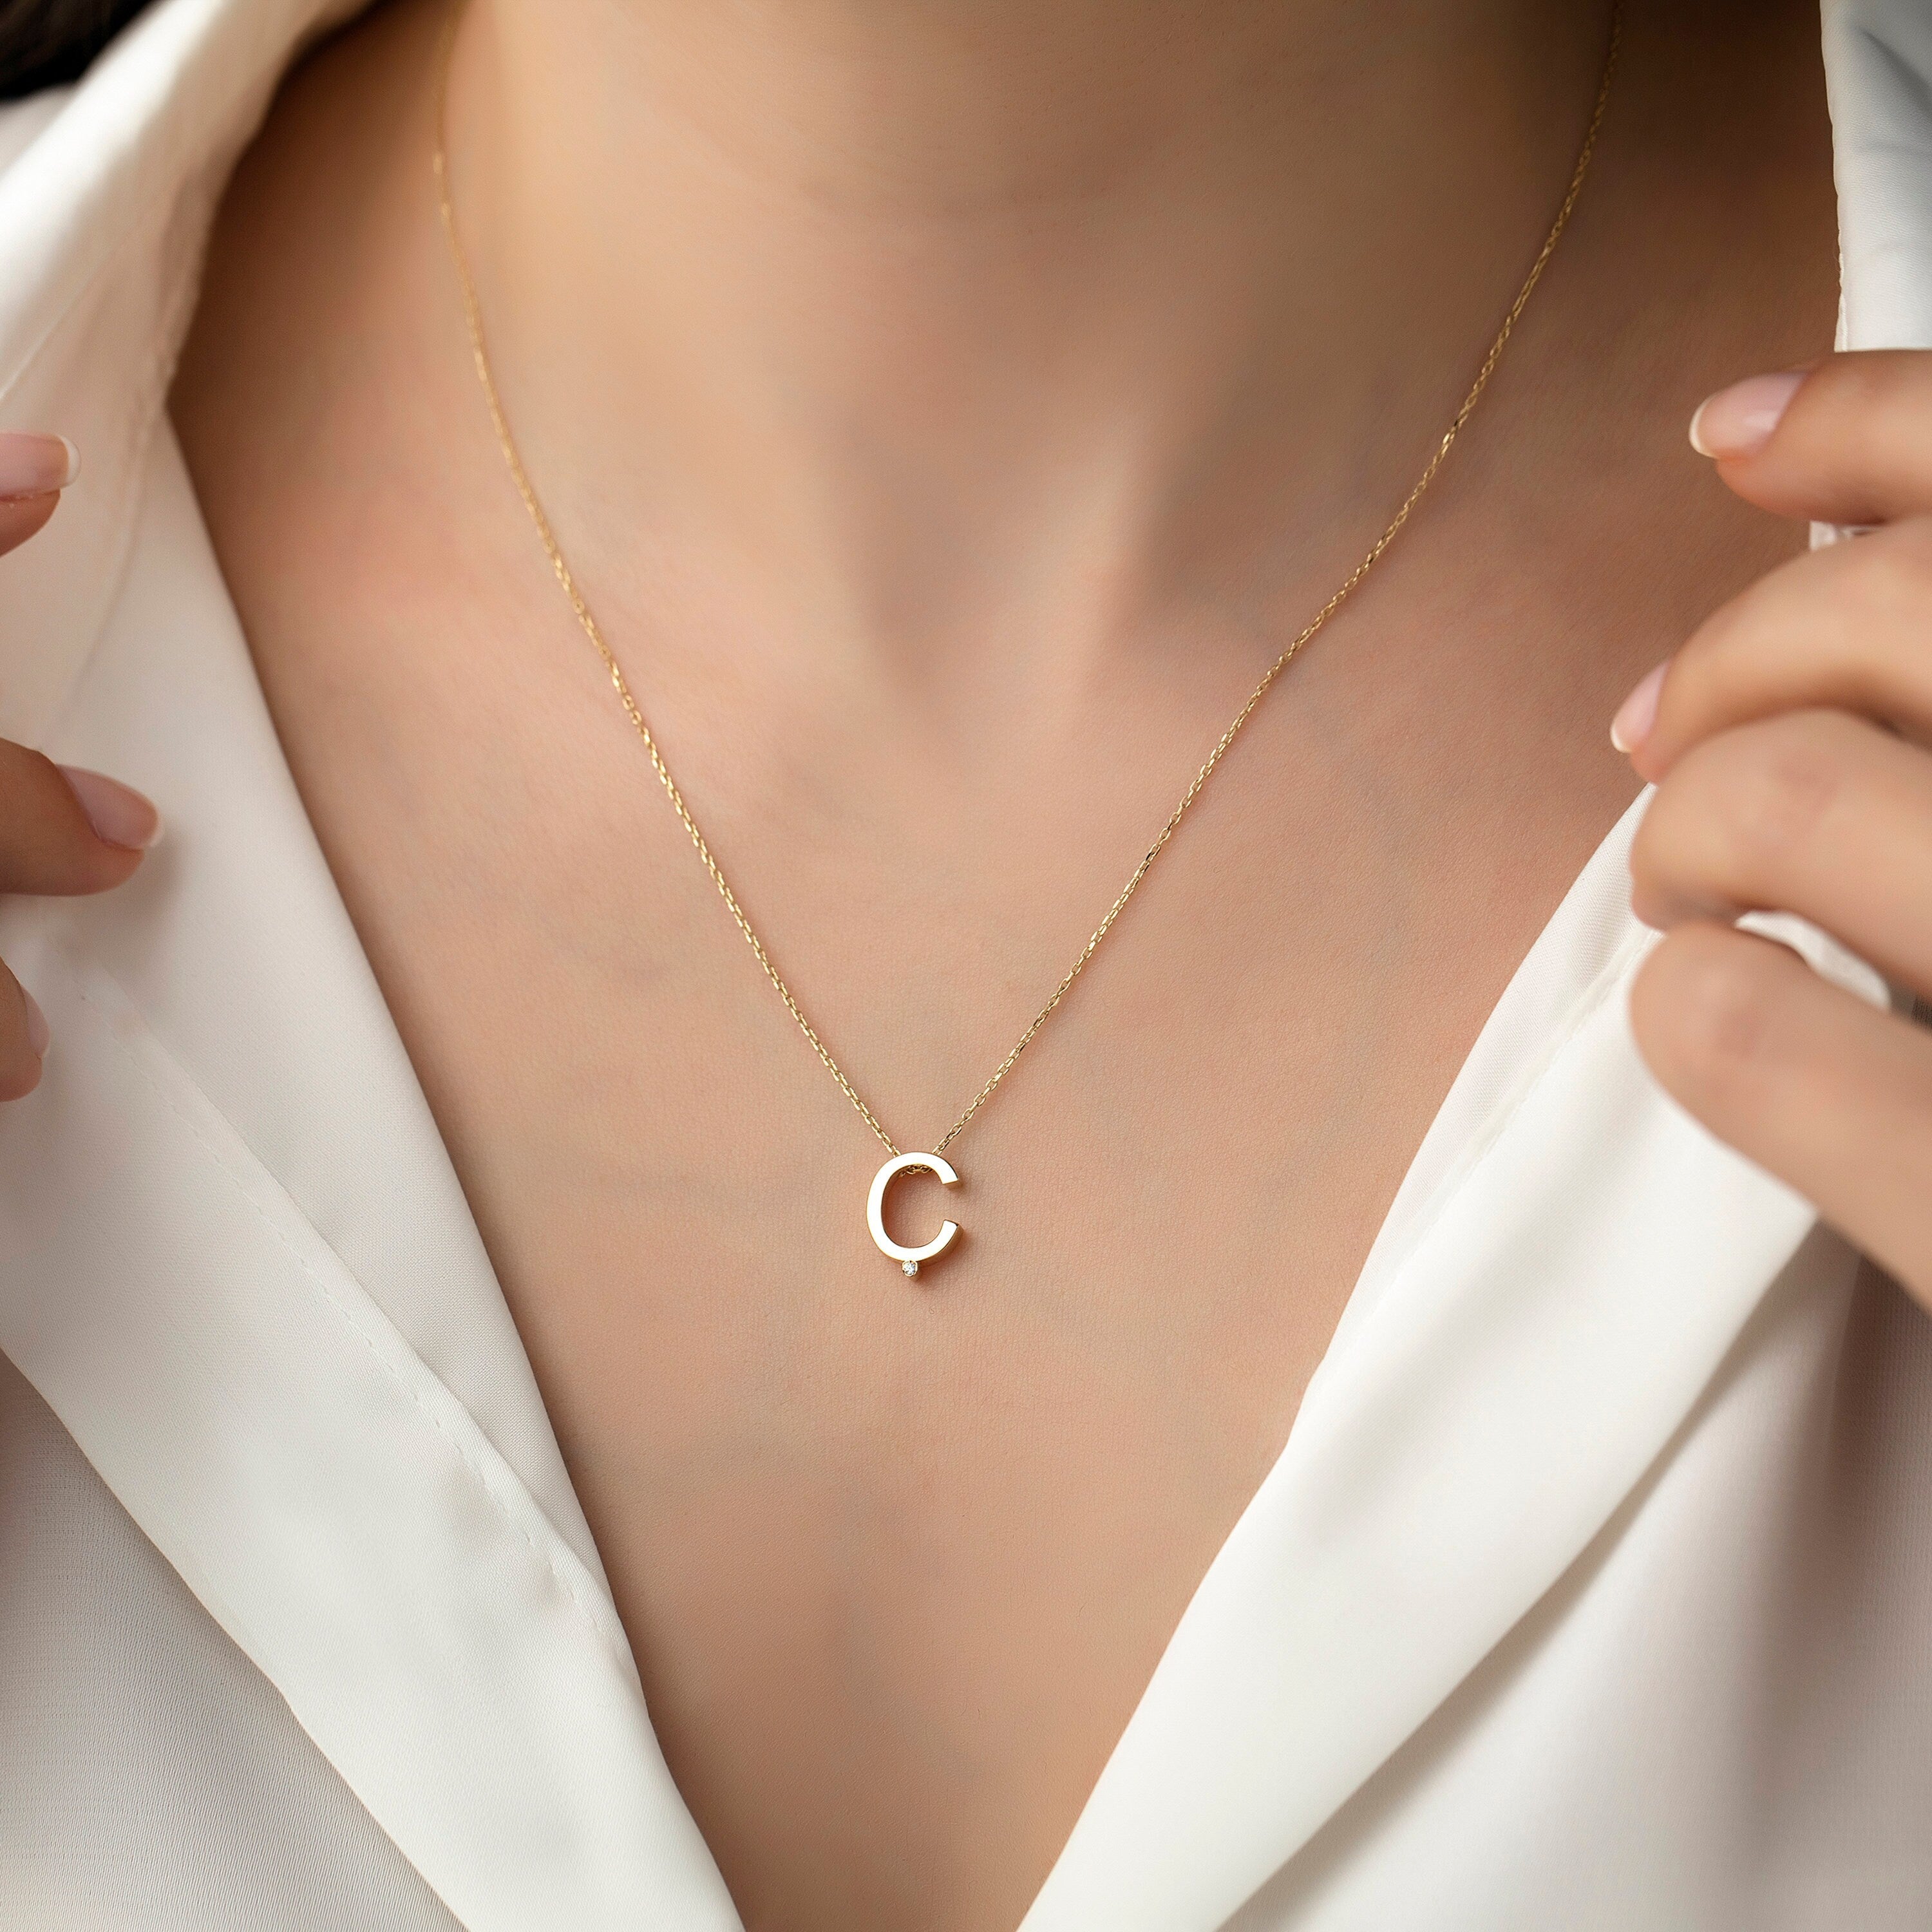 14k Gold Minimal C Initial Necklace